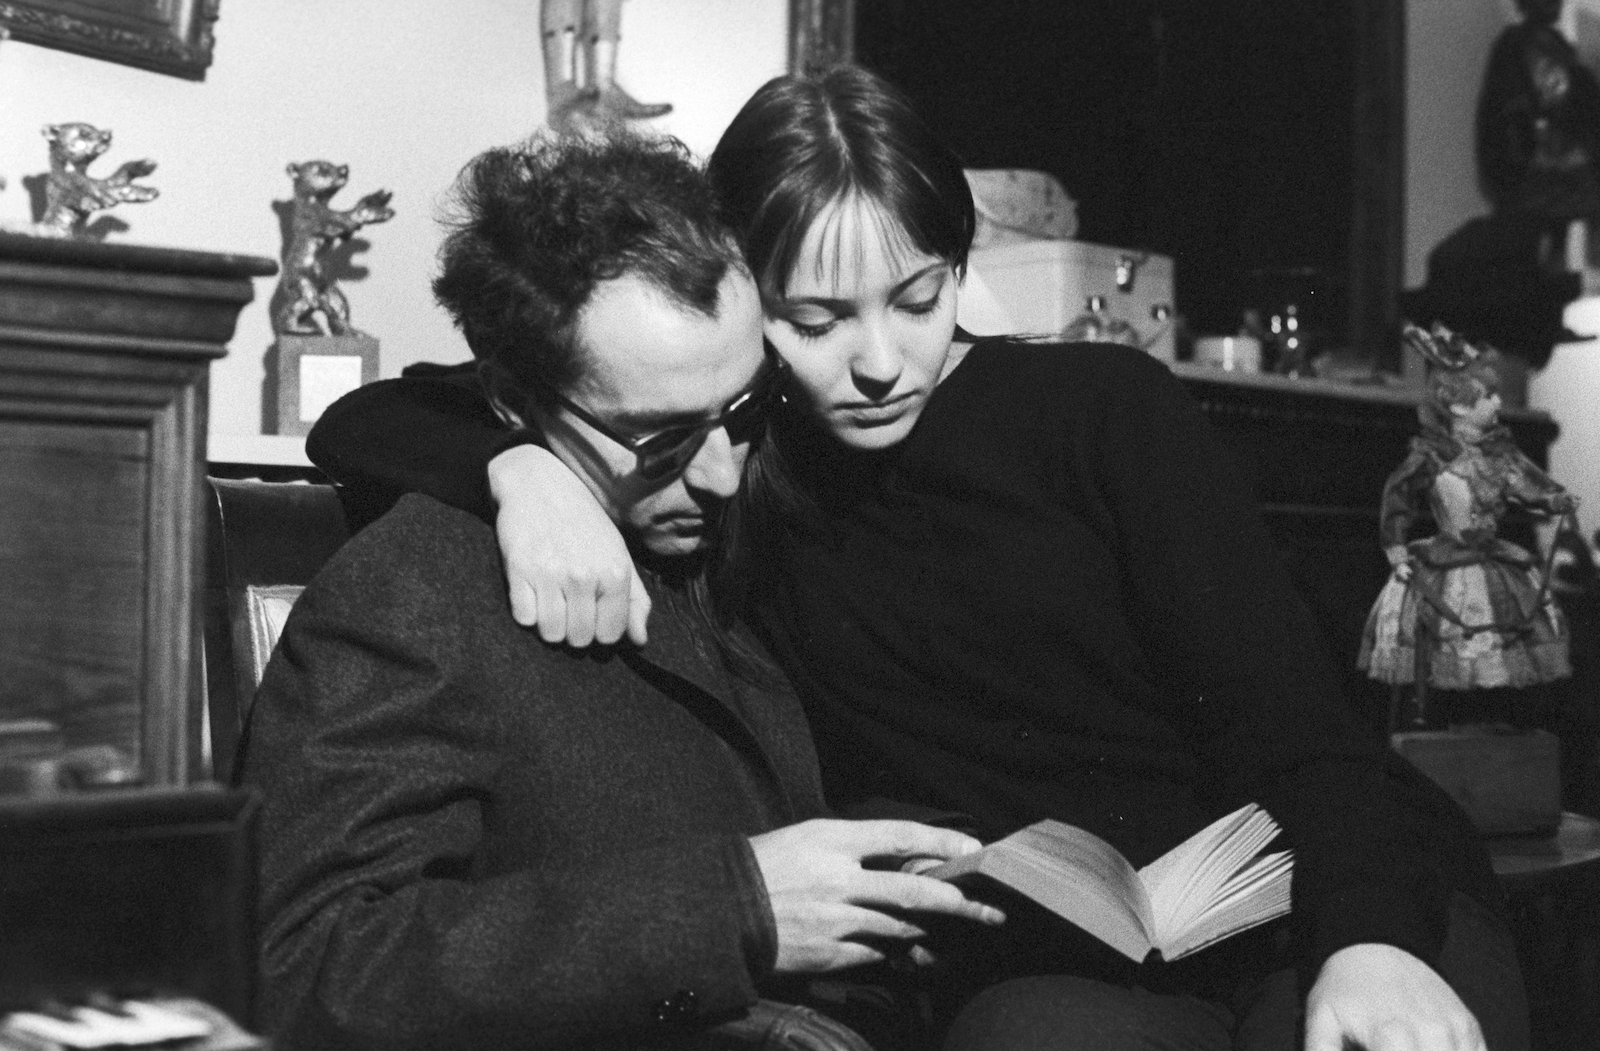 A black-and-white photograph of a man and a woman reading a book together